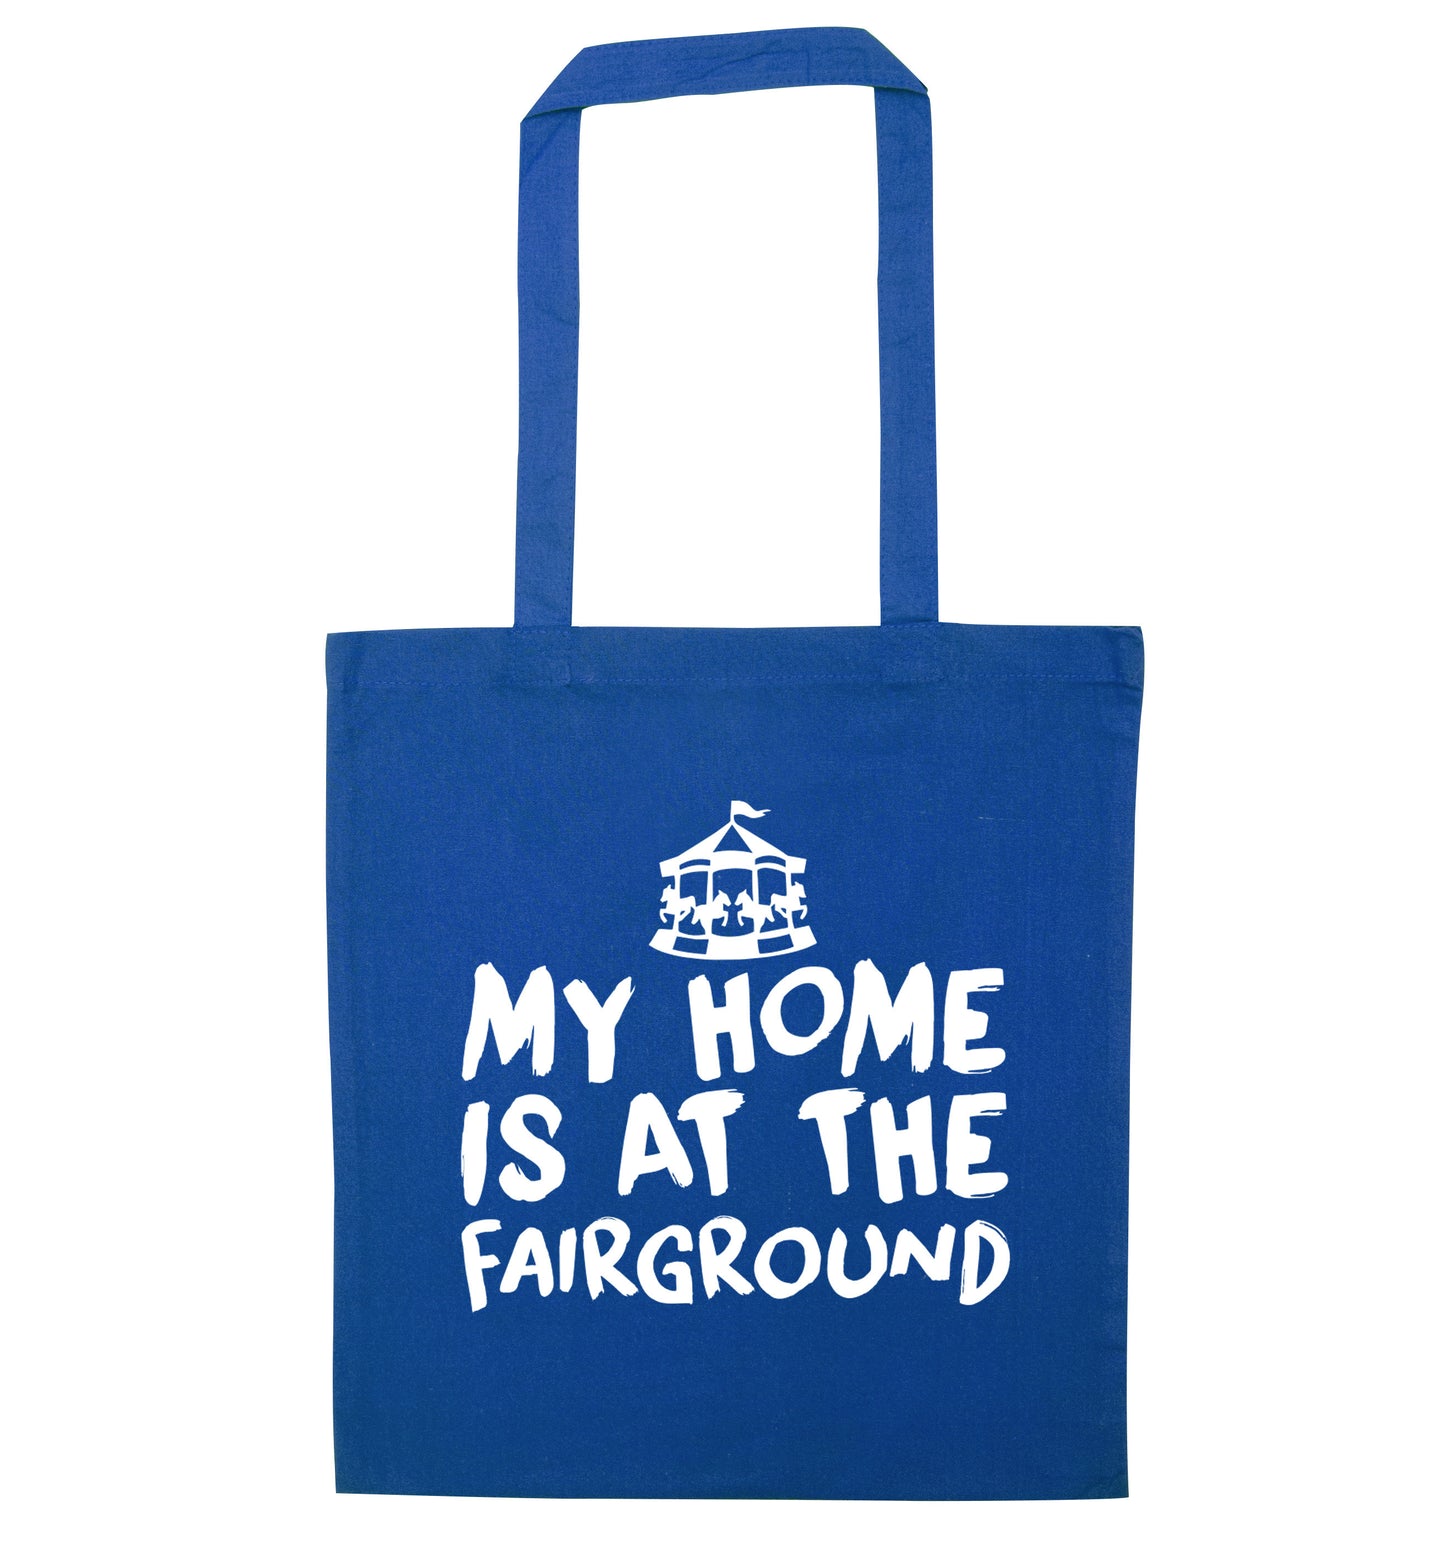 My home is at the fairground blue tote bag